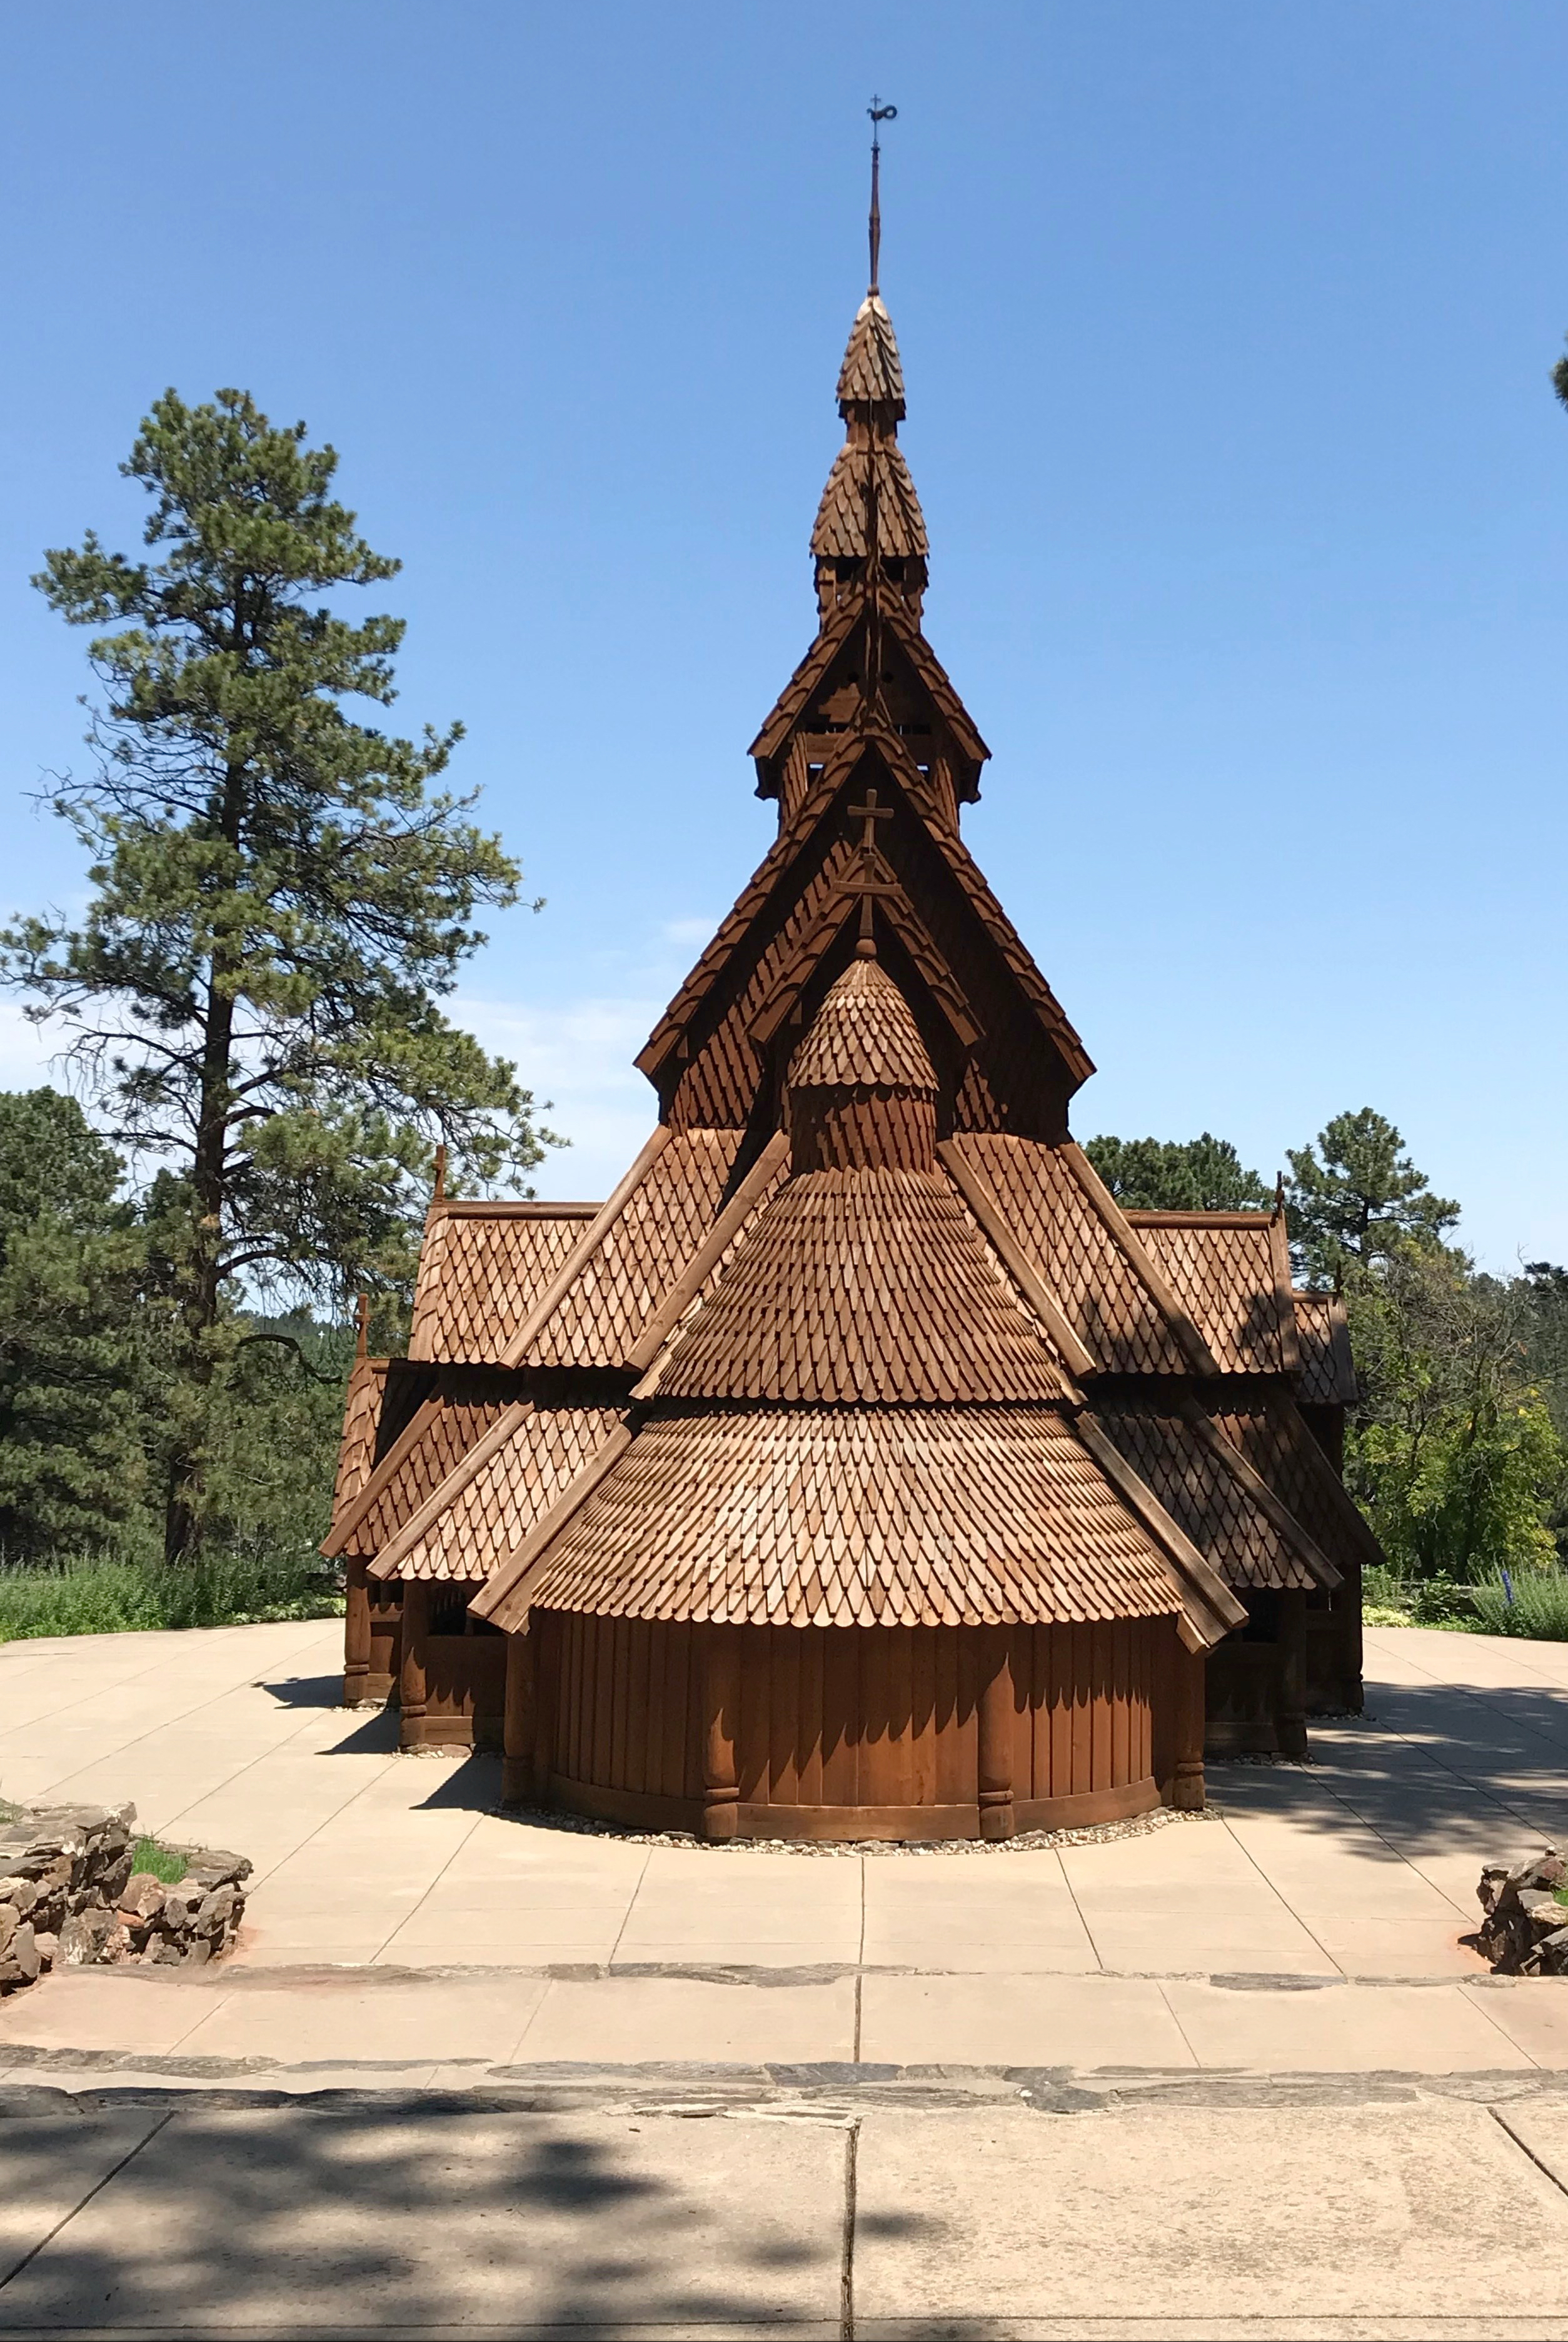 A wooden church sits on a concrete patio surrounded by pine trees, all under a clear, blue sky